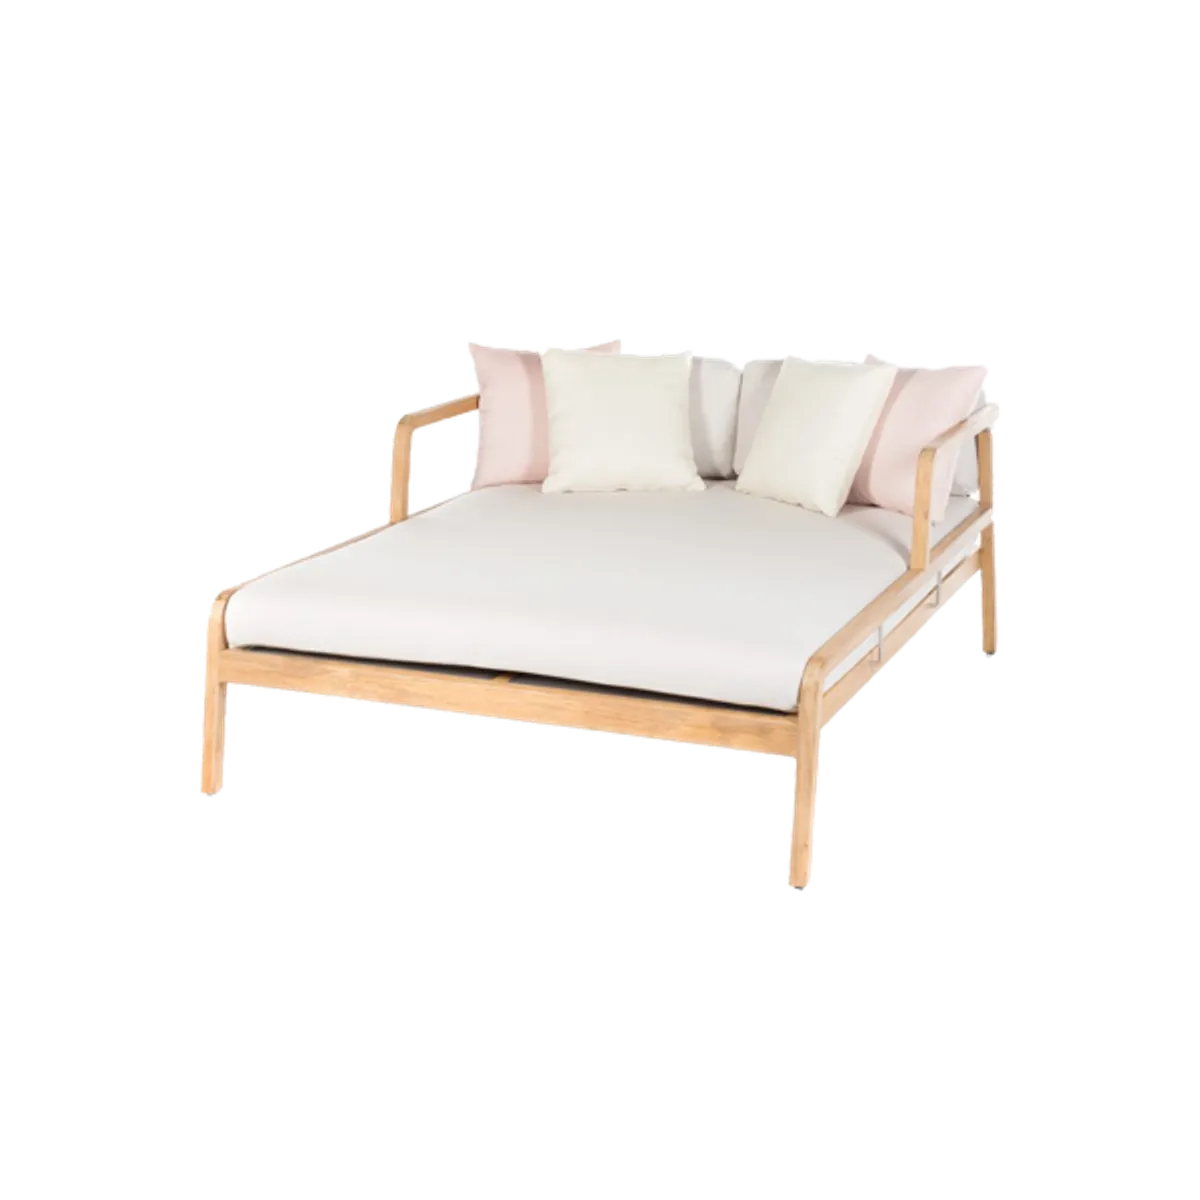 Carnelia daybed Inside Out Contracts